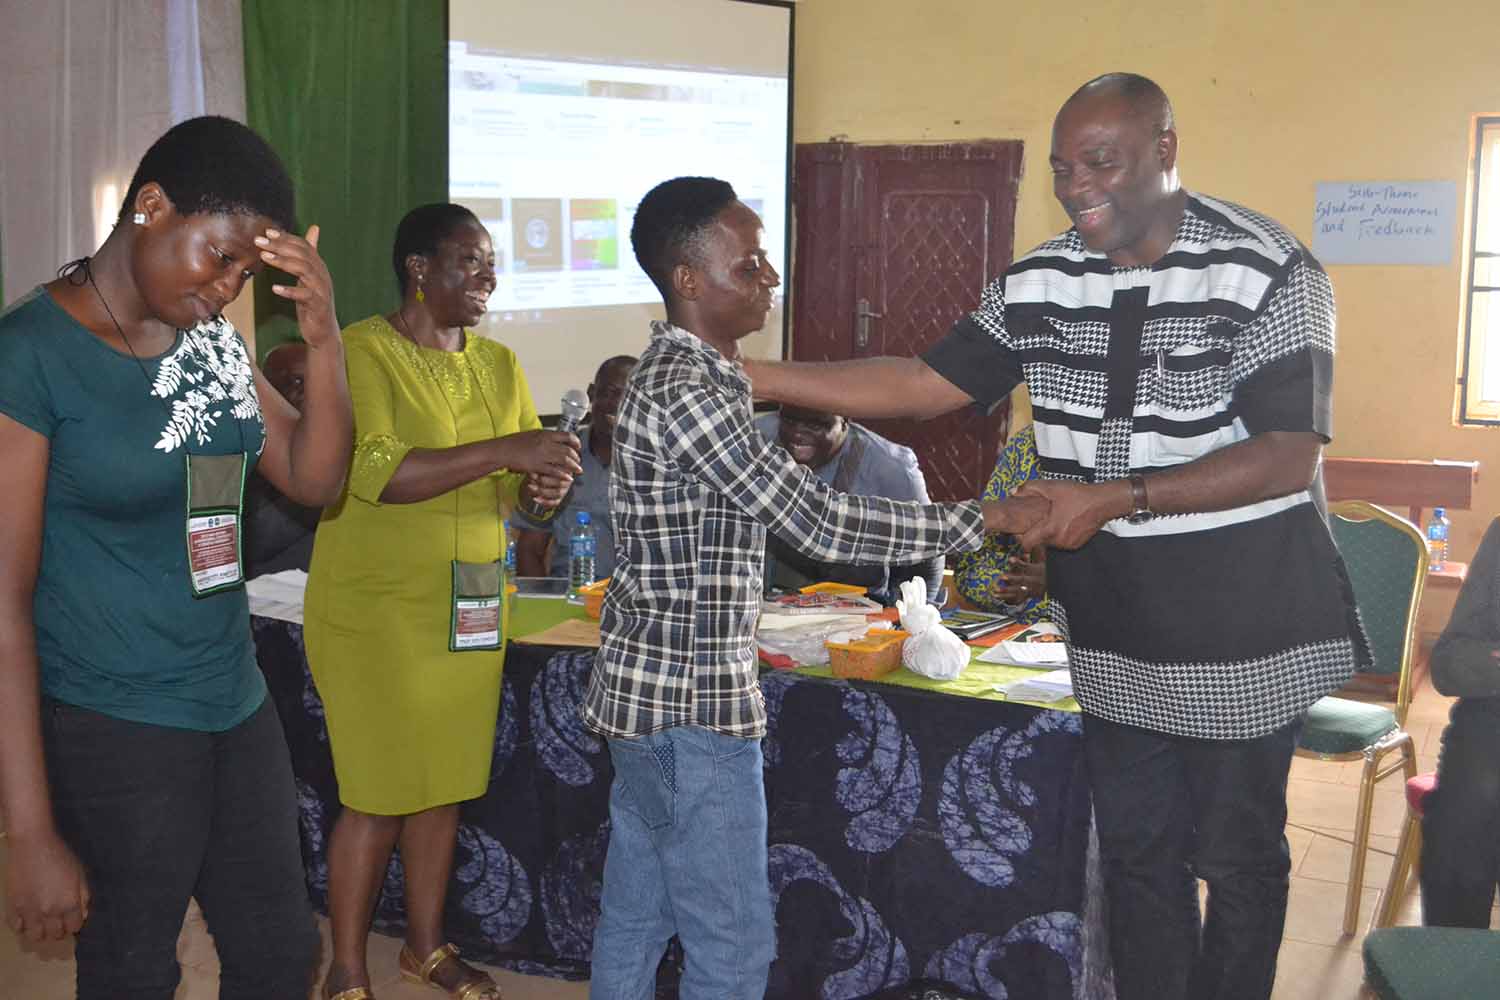 Winners of the Poetry workshop prizes in a hand shake with the Vice Chancellor